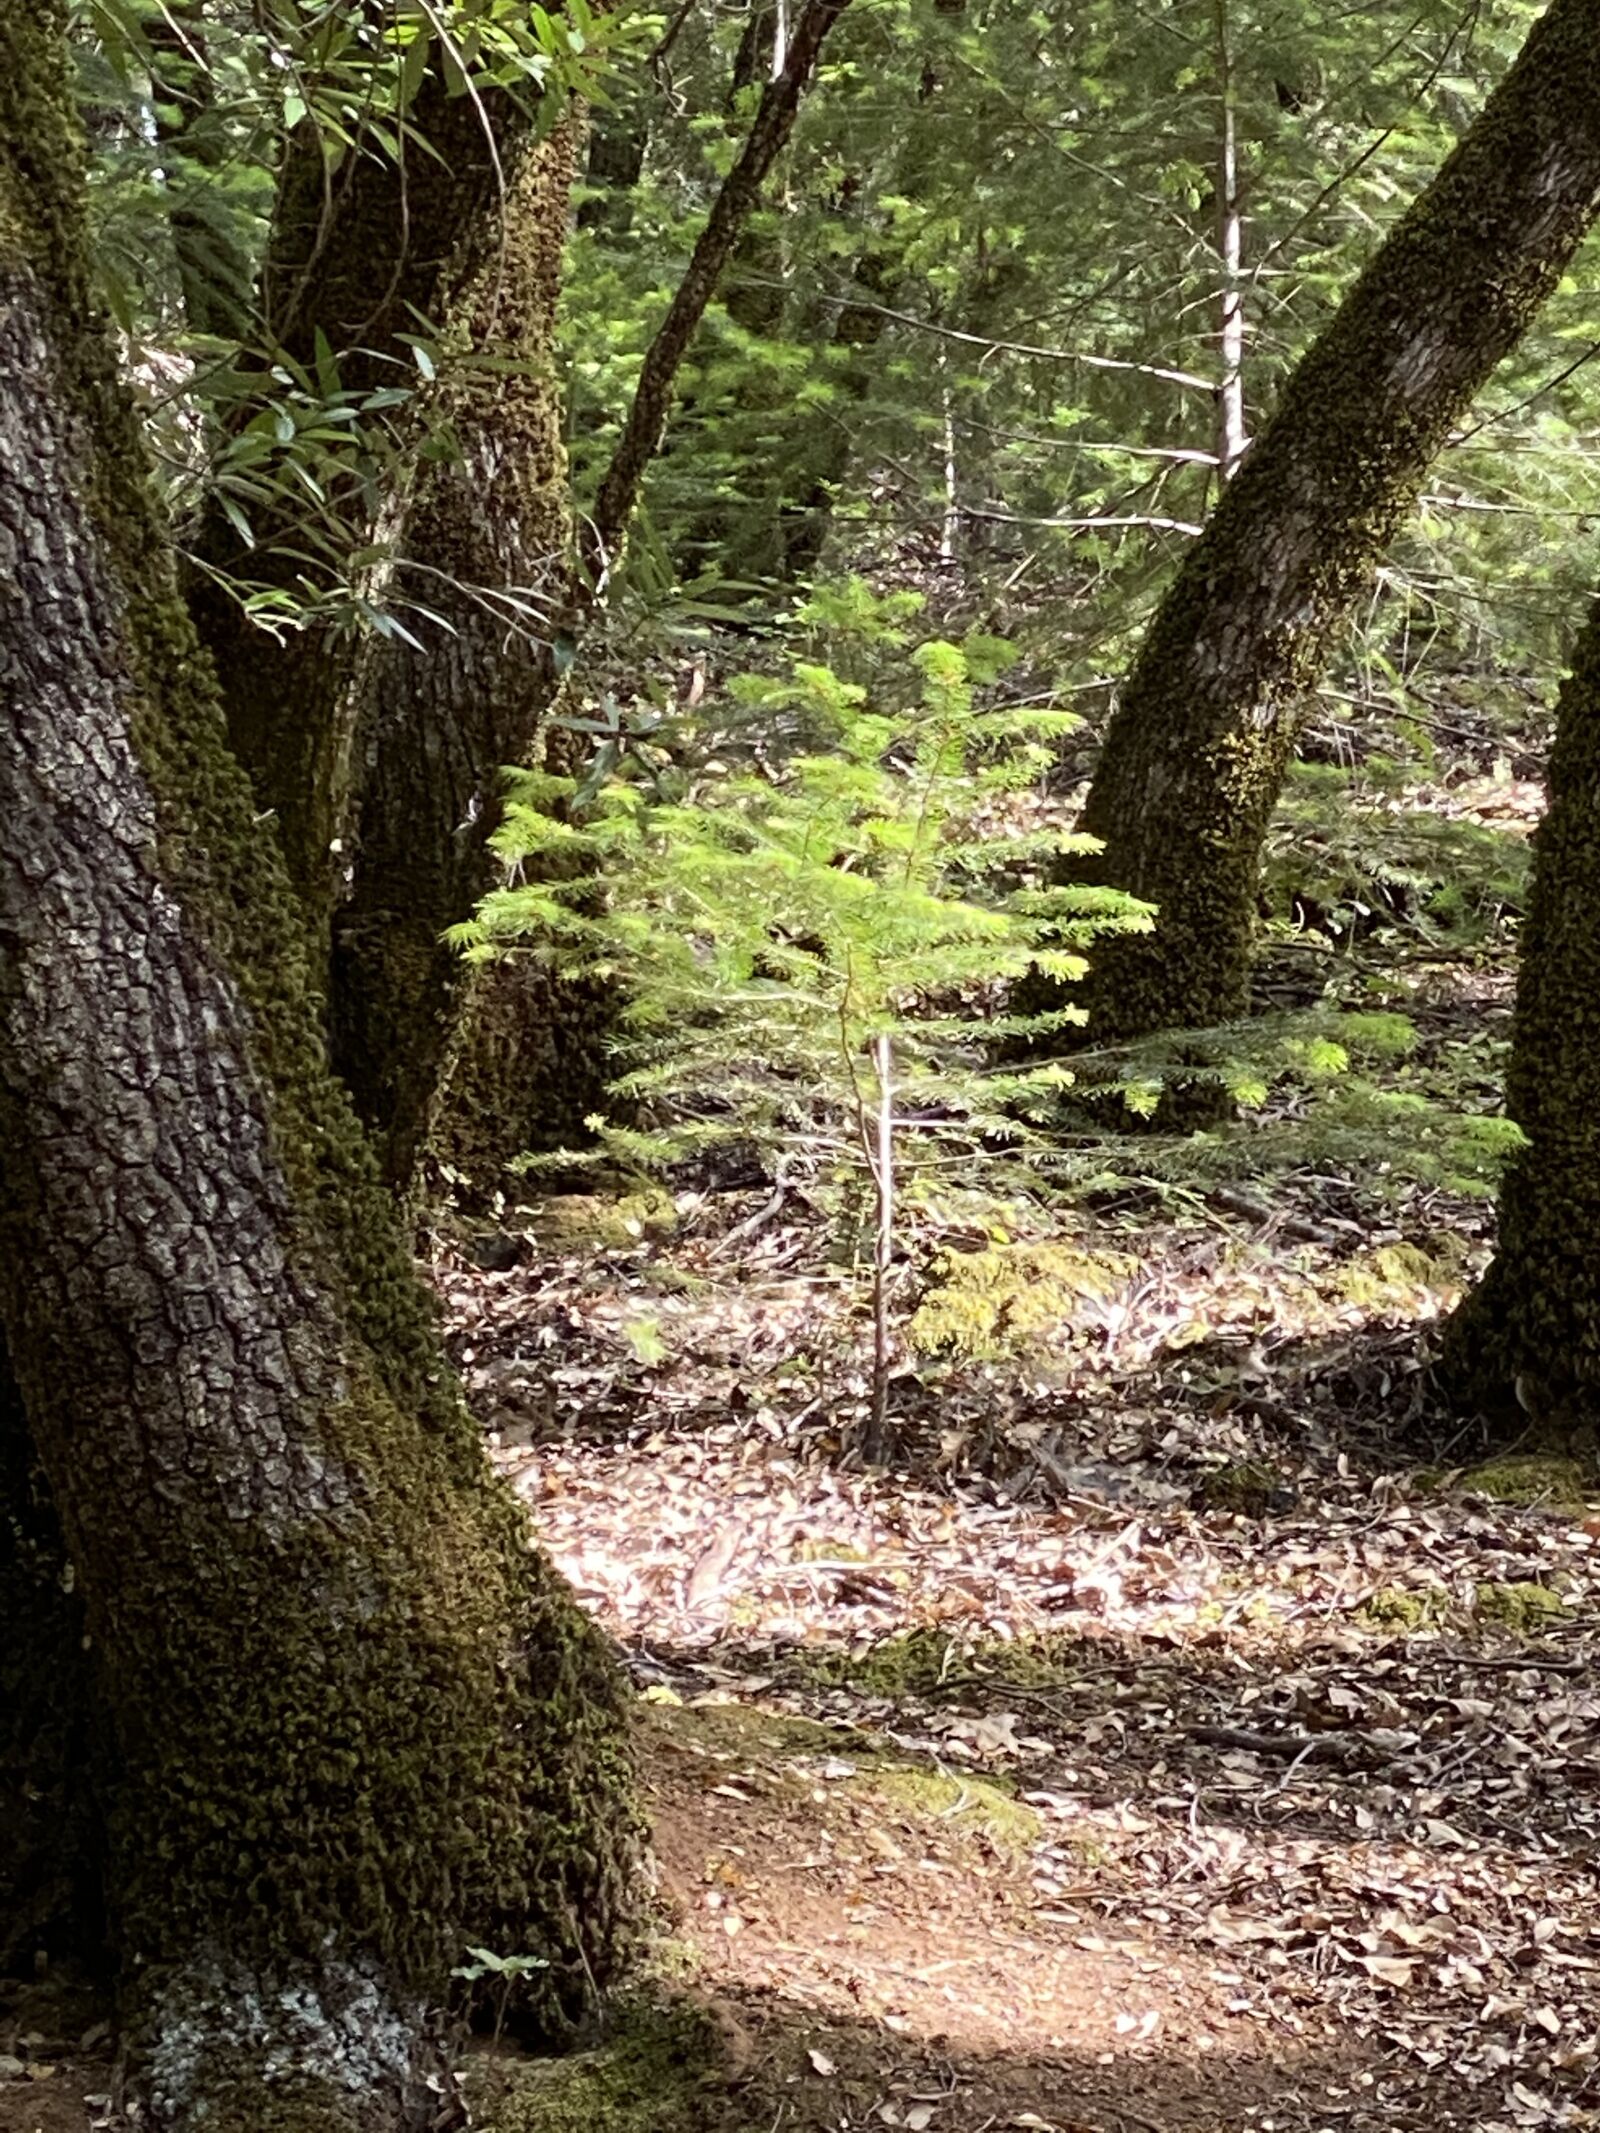 iPhone 11 Pro Max back triple camera 6mm f/2 sample photo. Forest, path, nature photography